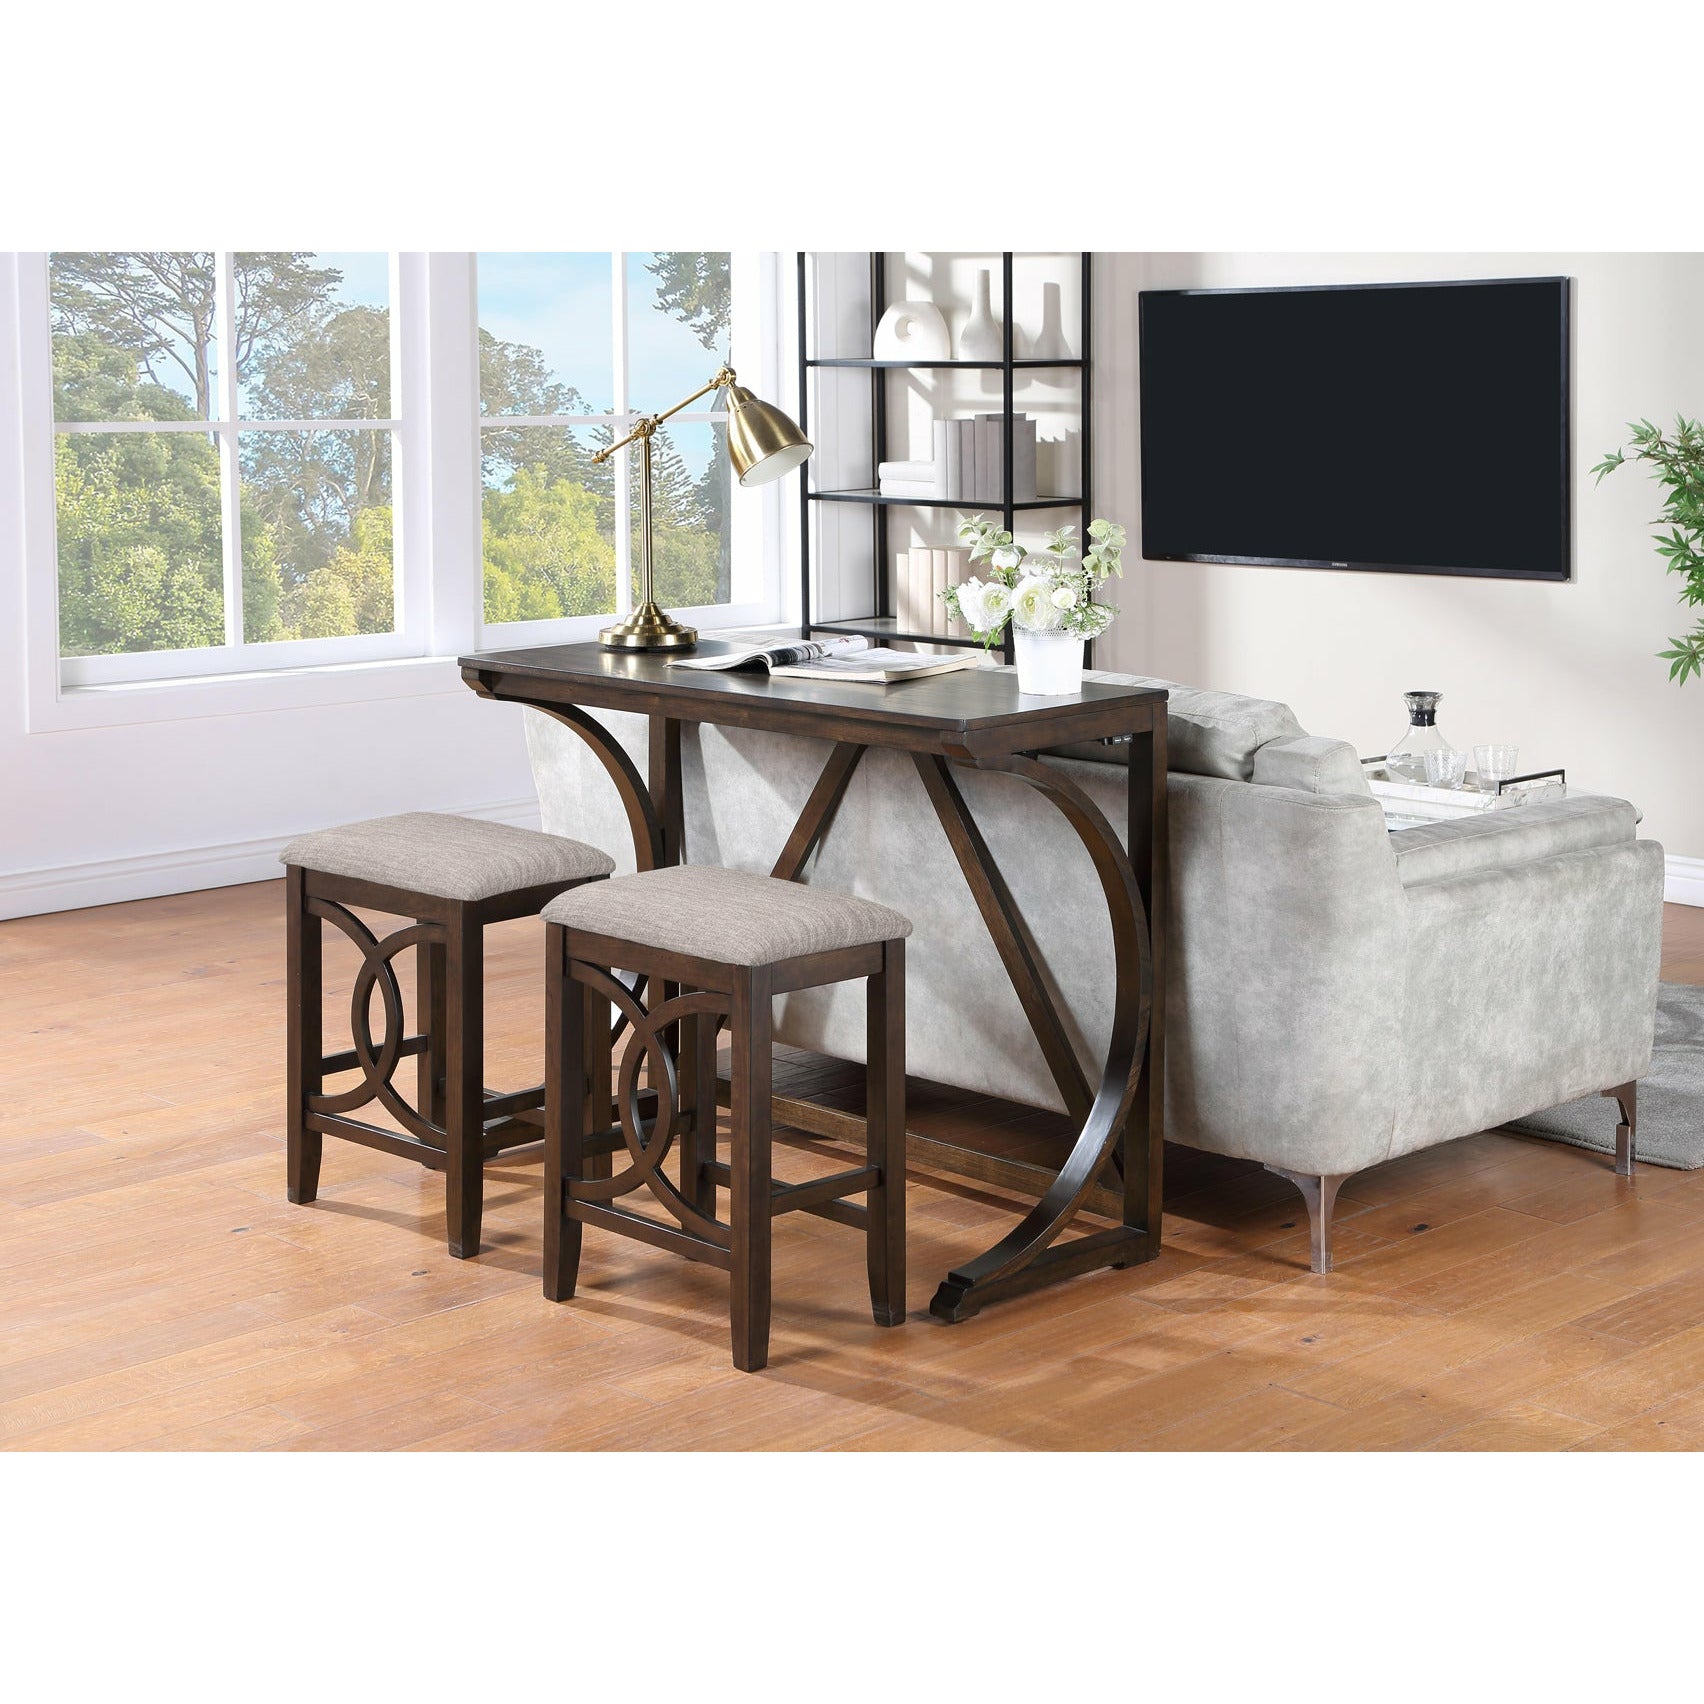 Bella Sofa Table with 2 Stools - Cherry